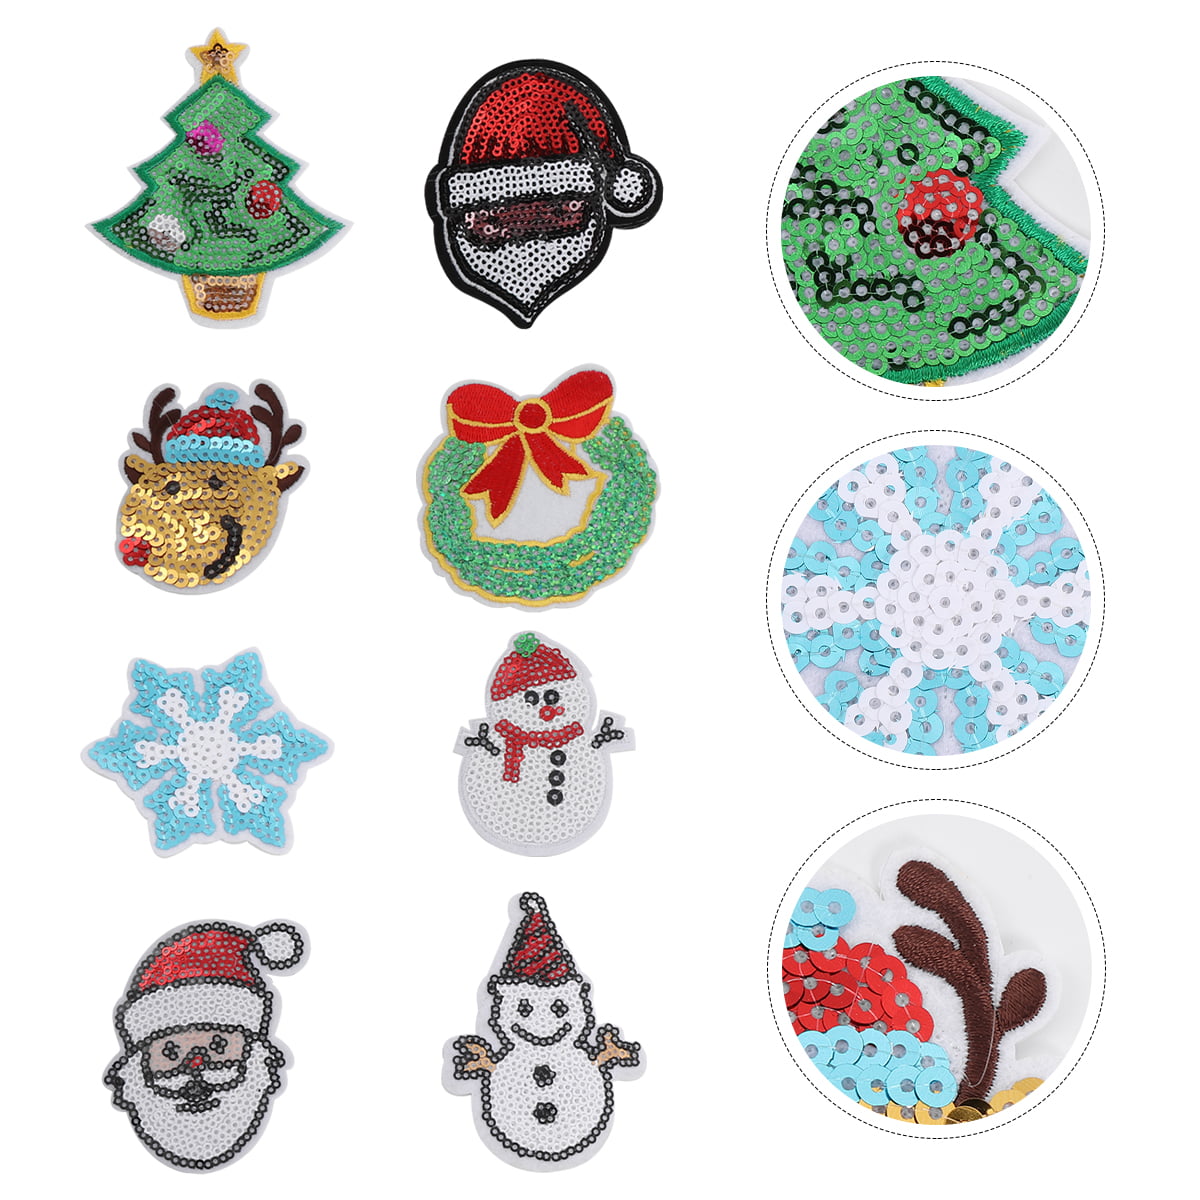 Abaodam Christmas Patches 20 Pcs Embroidery Patches Christmas Decor Holiday  Embroidered Patches Christmas Clothes Appliques Stylish Christmas